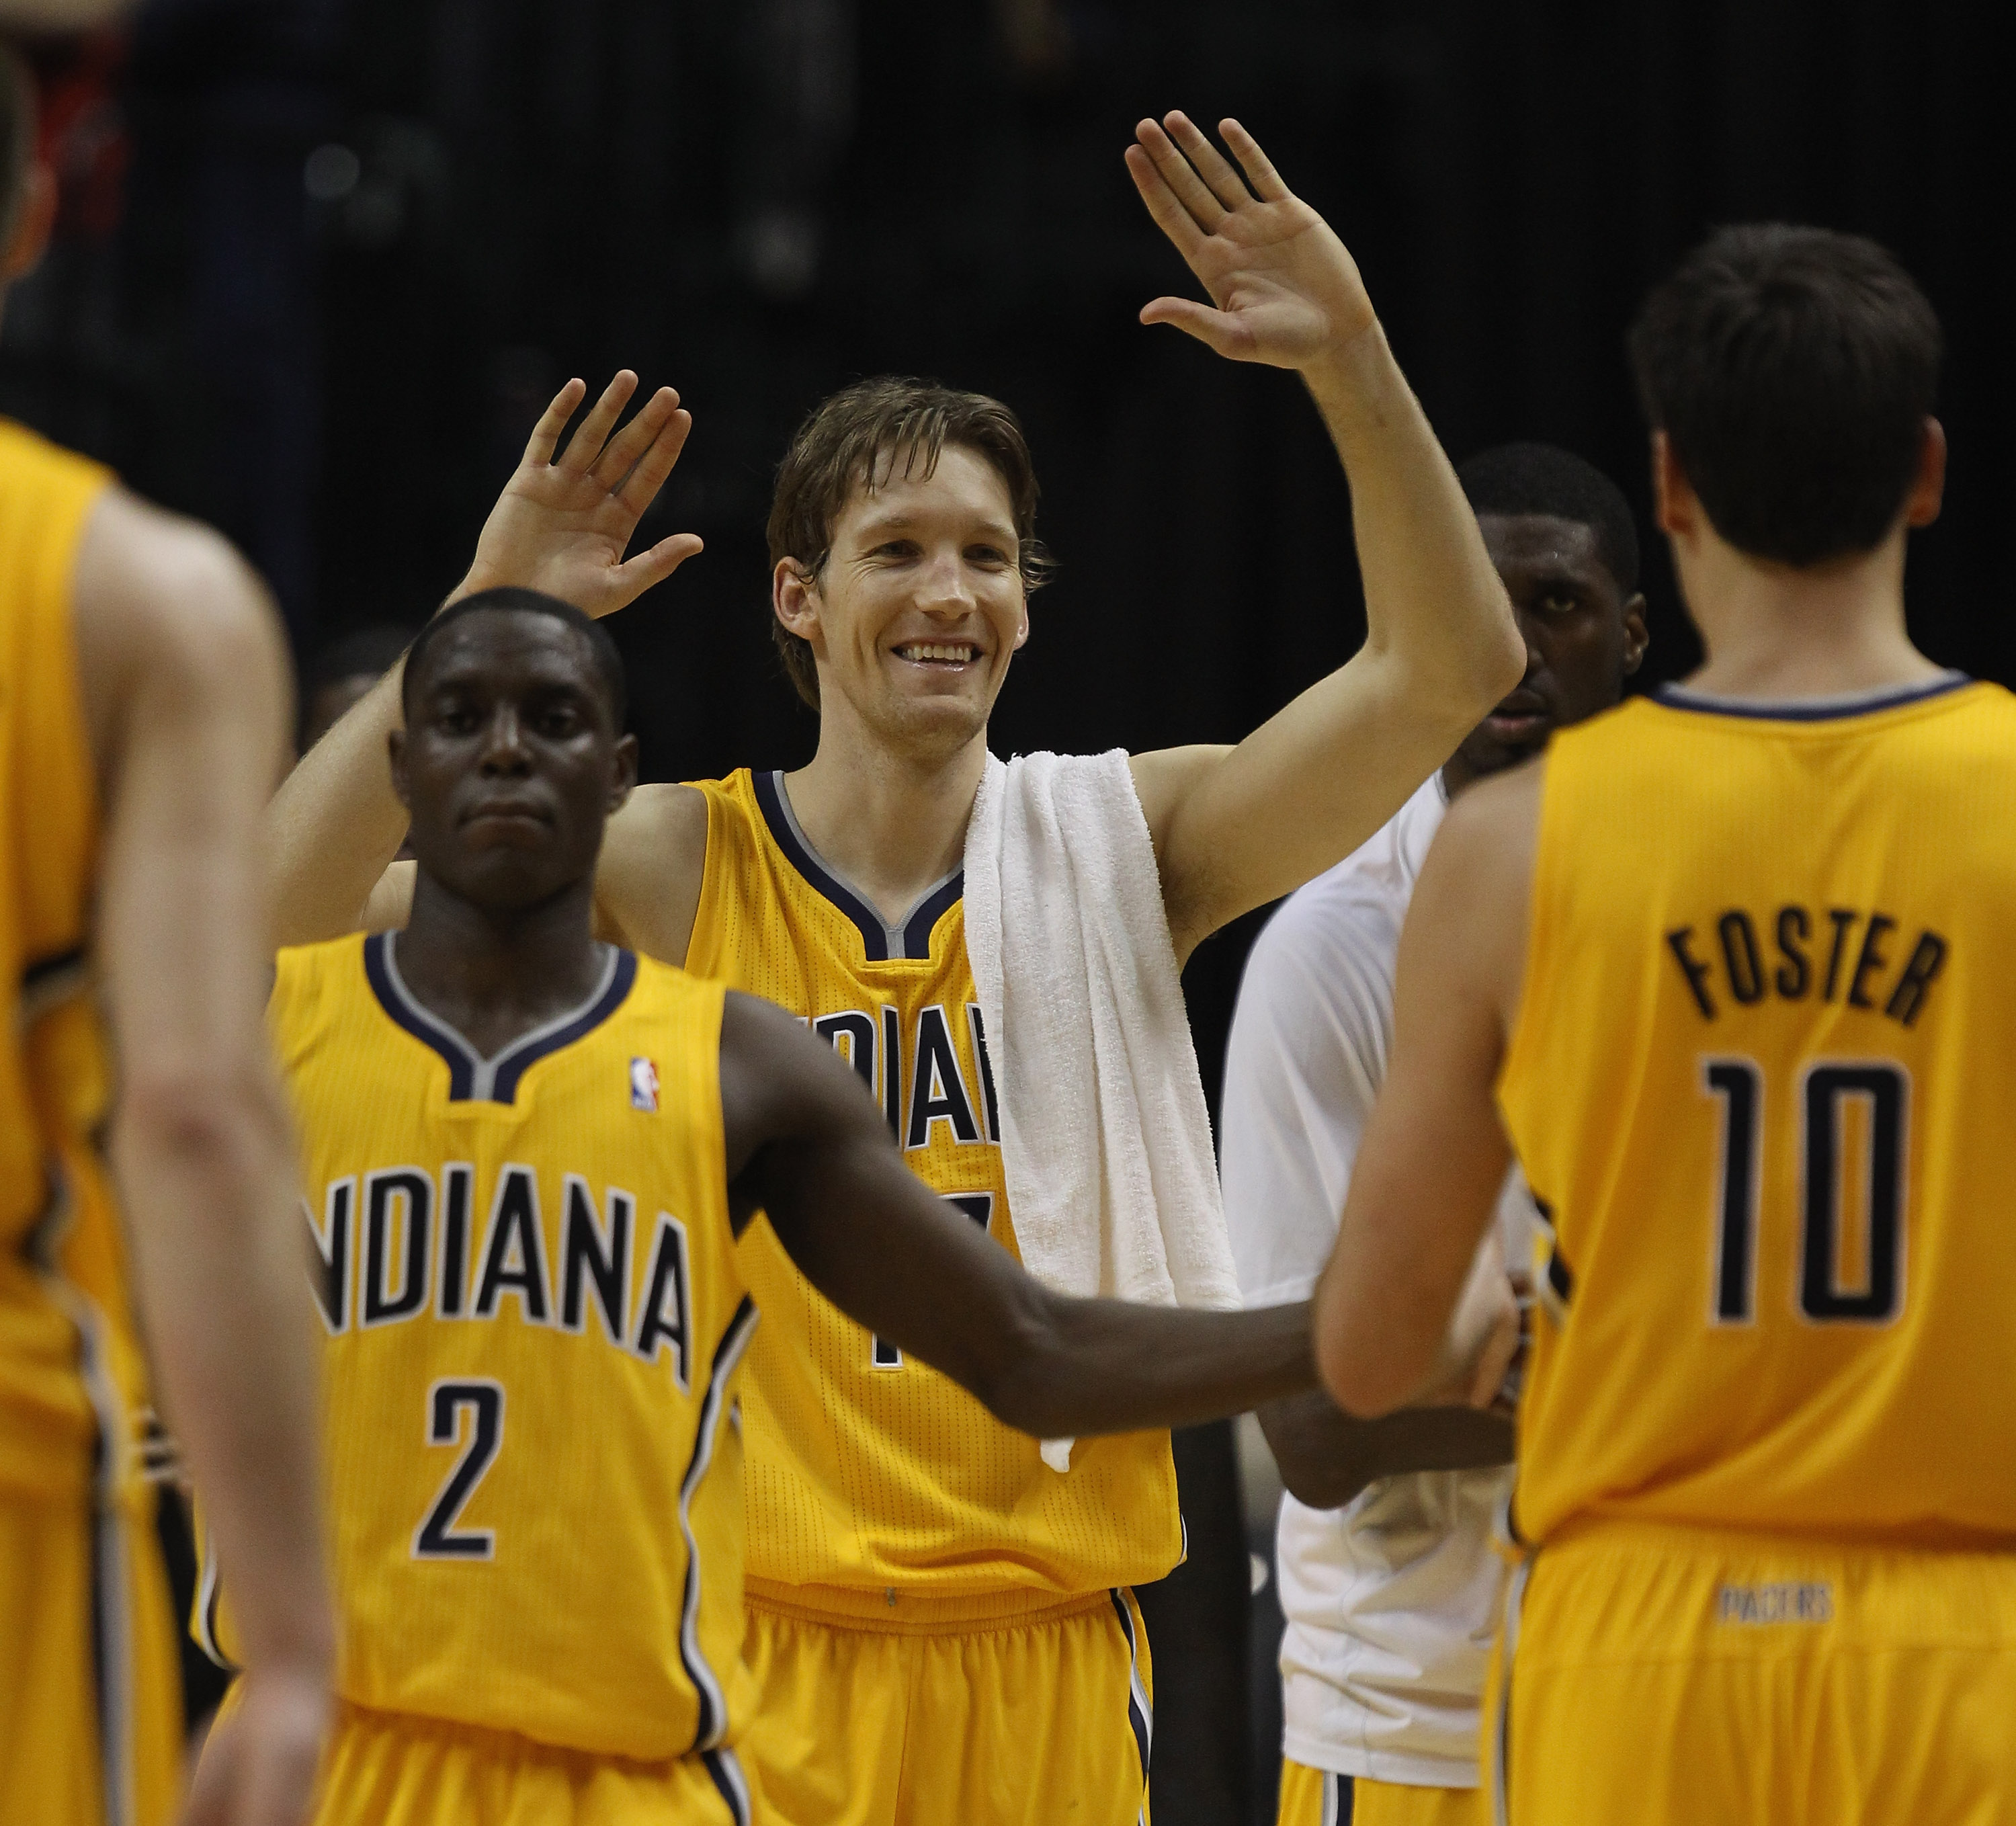 INDIANAPOLIS, IN - APRIL 23: Darren Collison #2 and Mike Dunleavy #17 of the Indiana Pacers welcome teammates to the bench during a time-out late against the Chicago Bulls in Game Four of the Eastern Conference Quarterfinals in the 2011 NBA Playoffs at Co